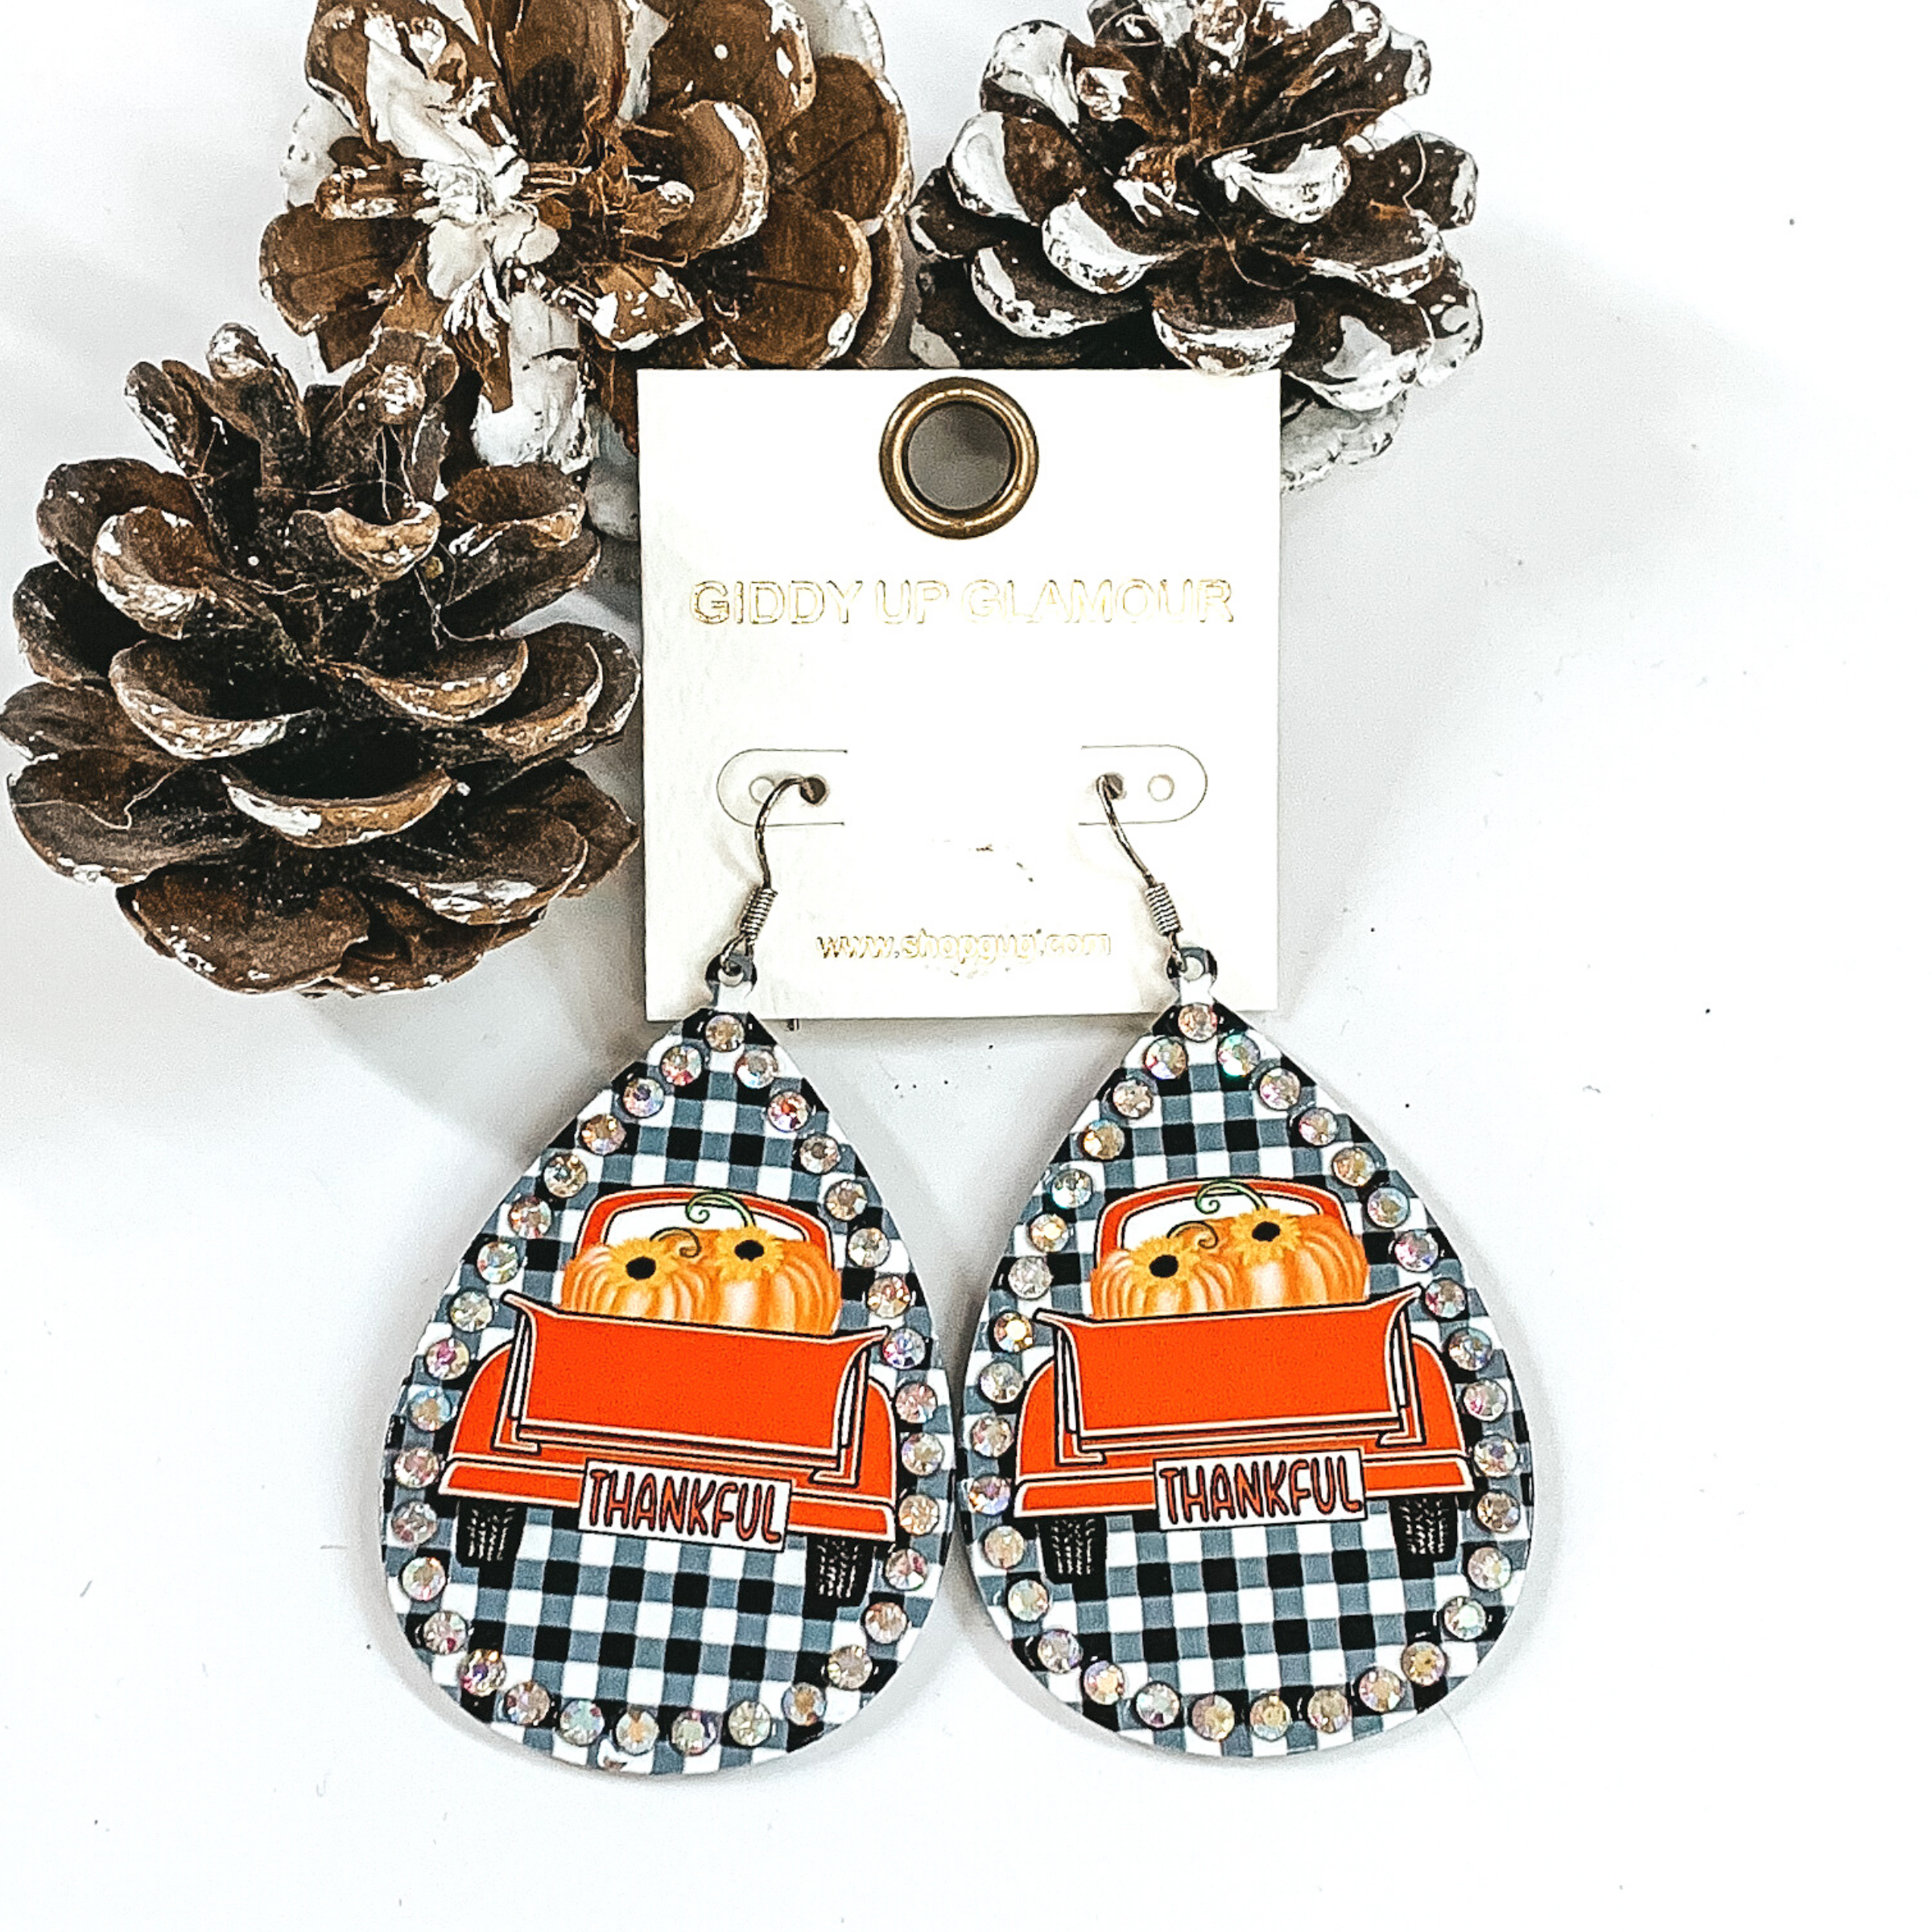 White buffalo plaid tear drop earrings with an ab crystal outline. On the earrings you also have an image of an orange truck bed with orange pumpkins in the bed. These earrings are pictured in a white background with pinecones. 